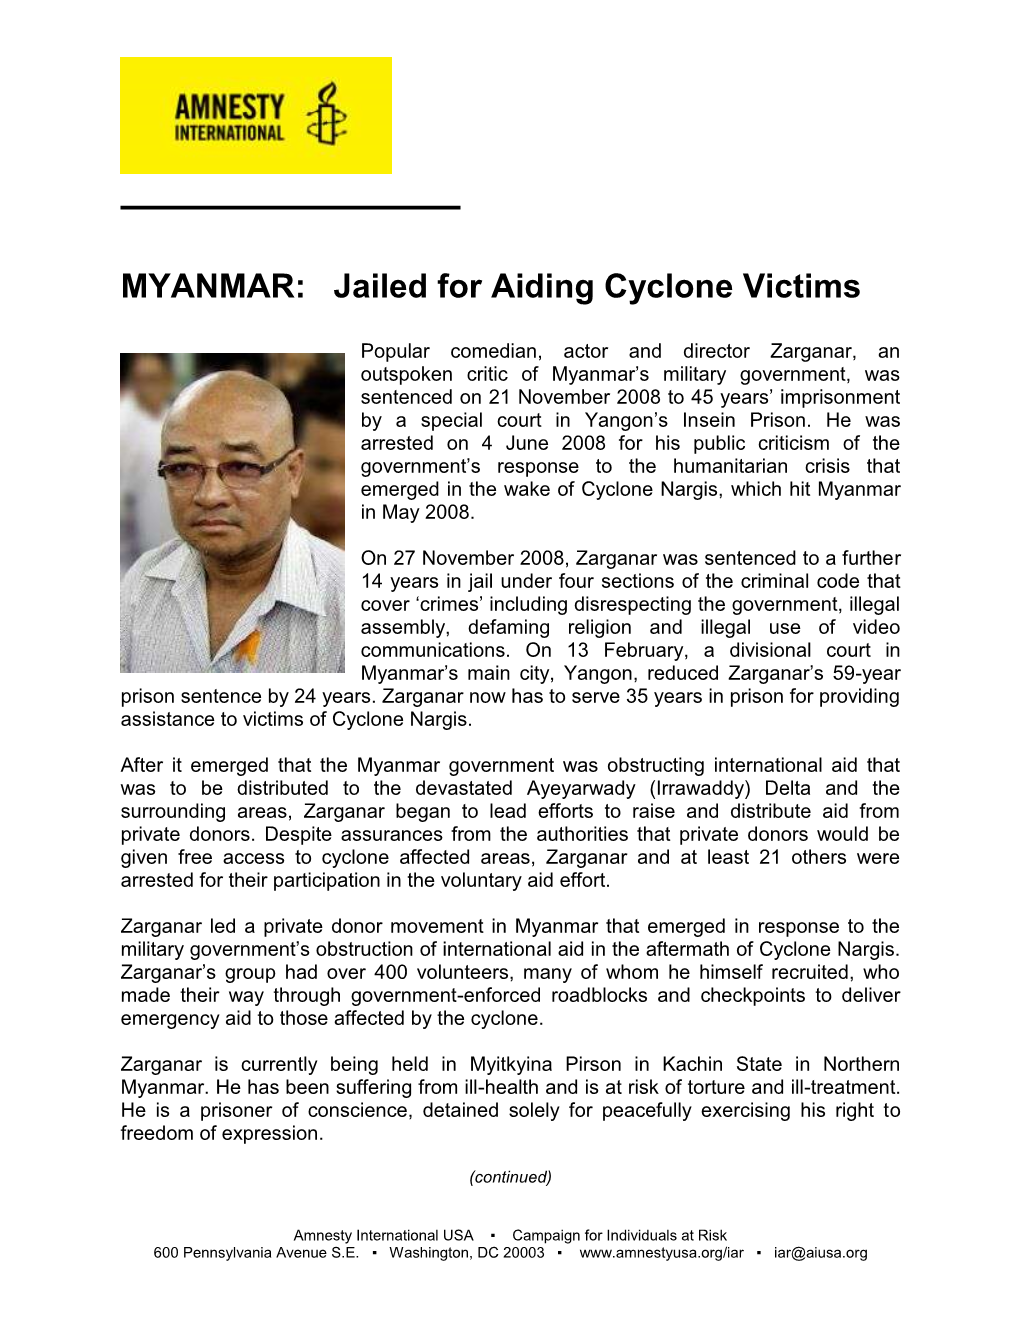 MYANMAR: Jailed for Aiding Cyclone Victims